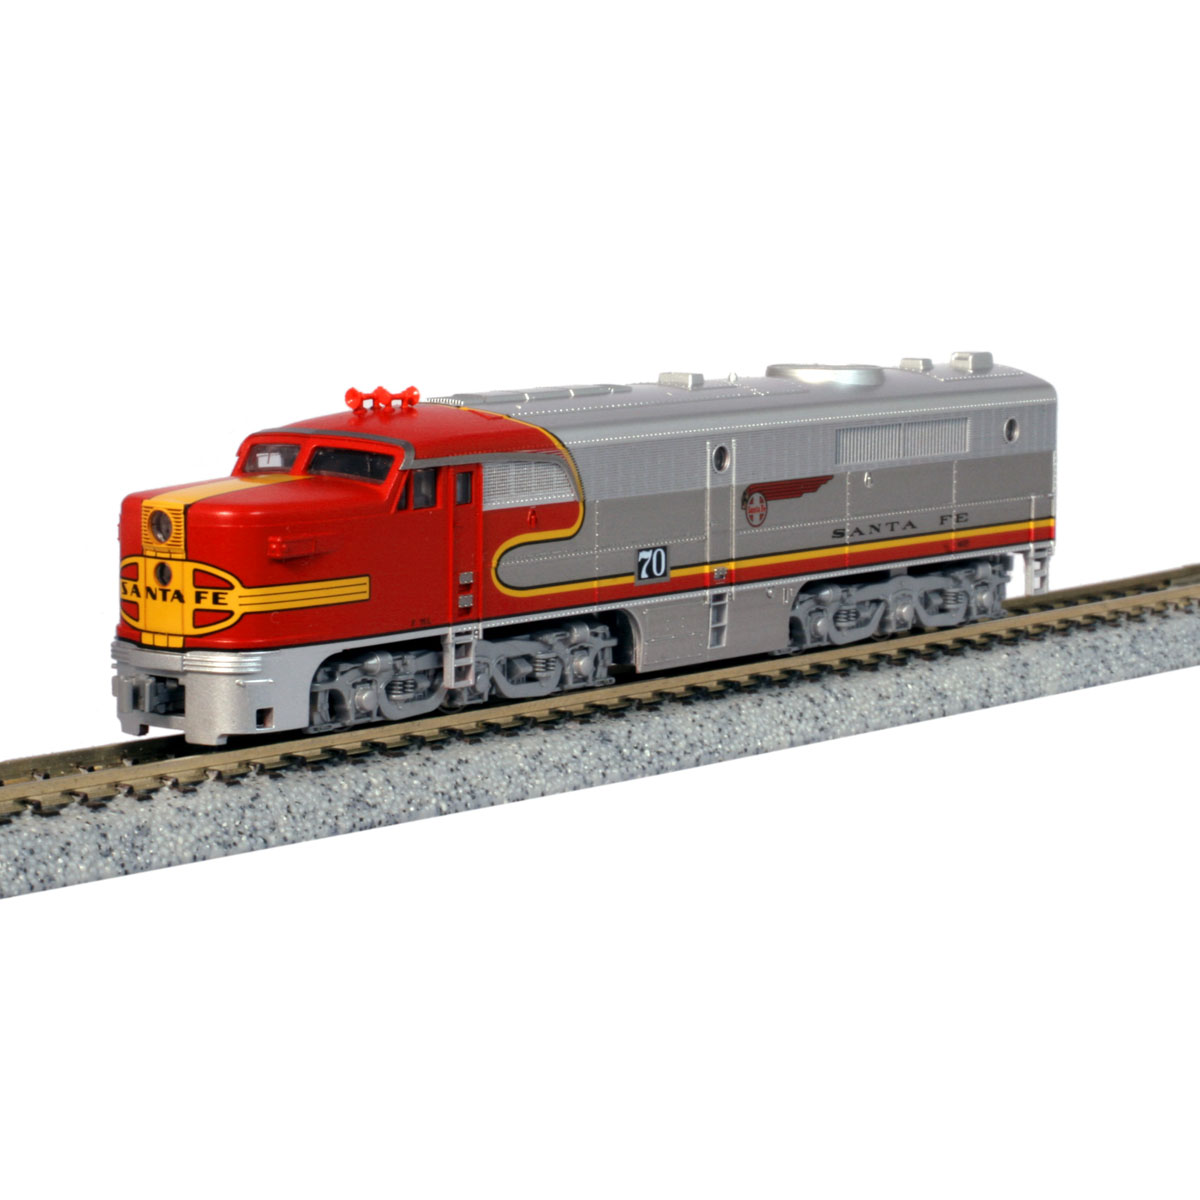 Model Railroads And Trains N Scale Freight Cars Use Drop Down To Select N